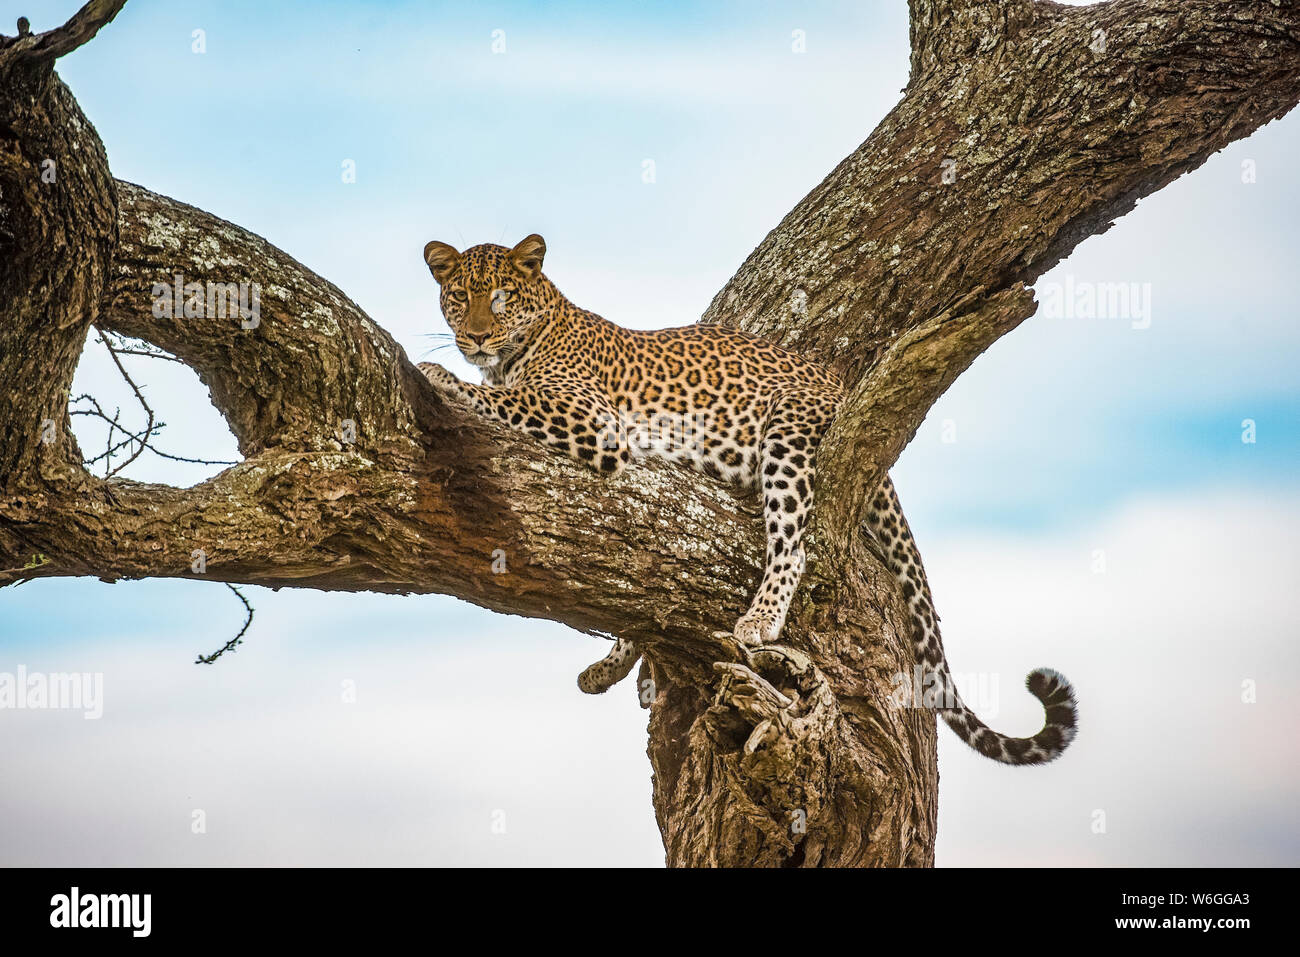 Leopard (Panthera pardus) resting in tree in the Ndutu area of the Ngorongoro Crater Conservation Area on the Serengeti Plains; Tanzania Stock Photo